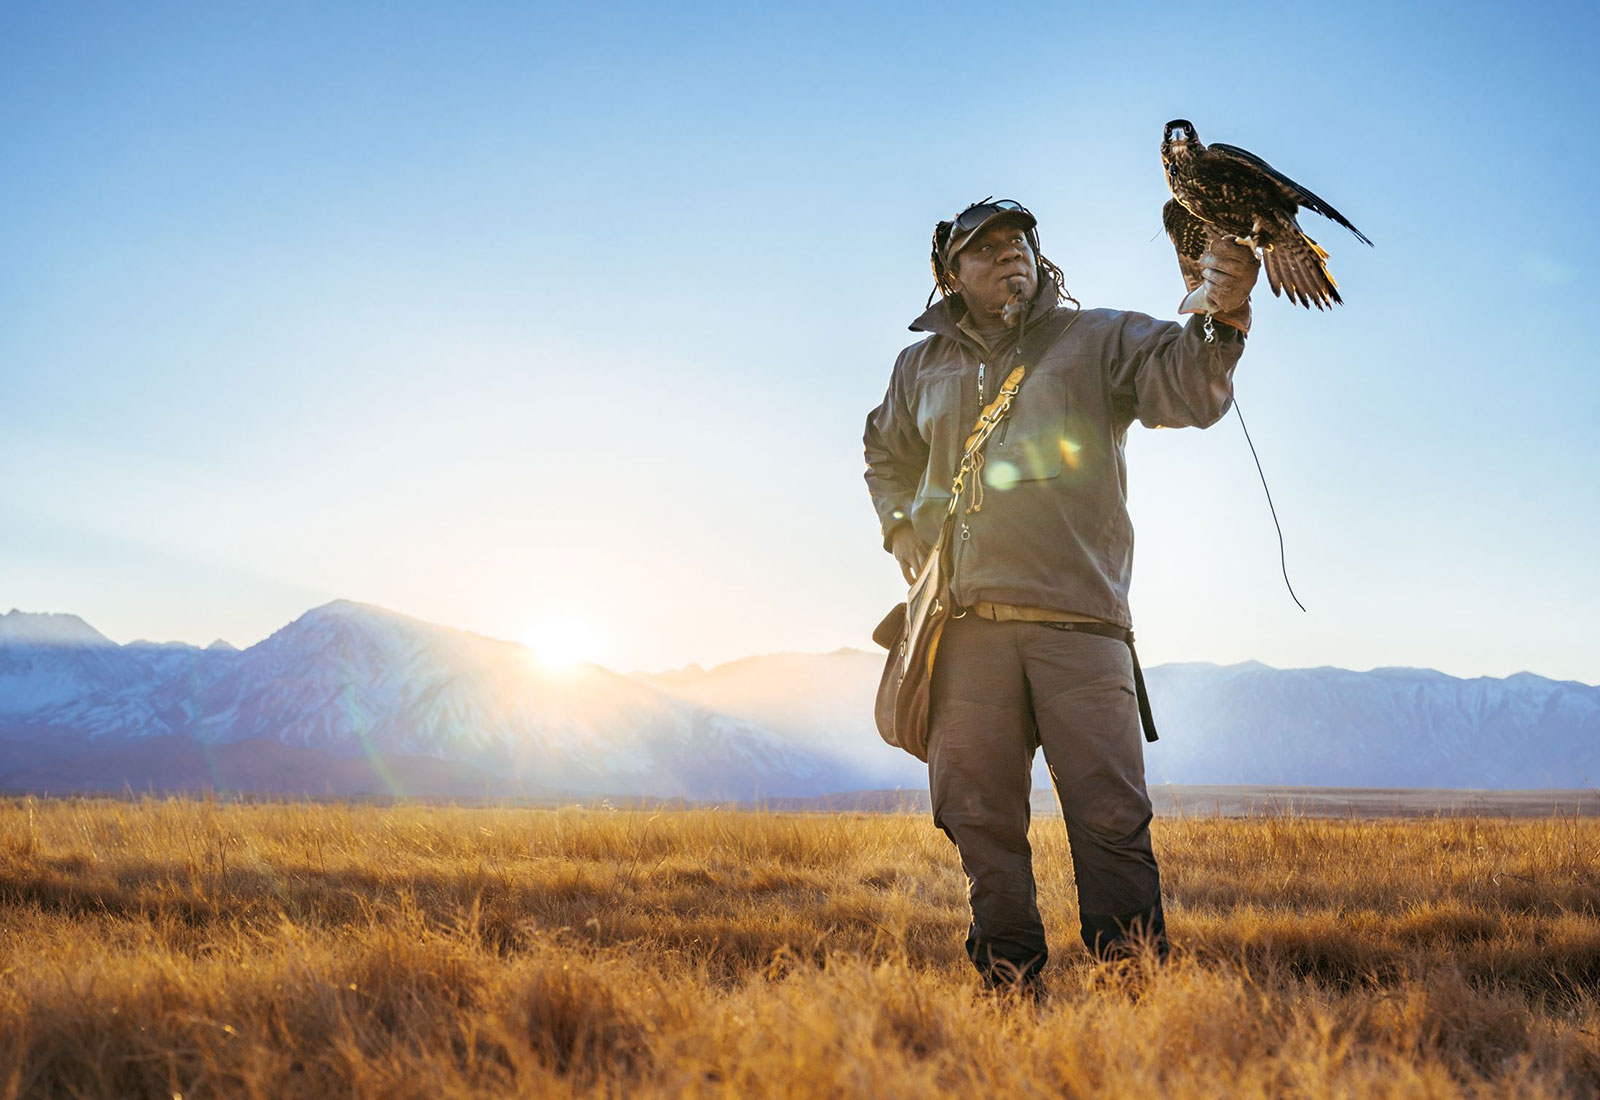 Male falconer holding bird of prey in a field with mountains in background